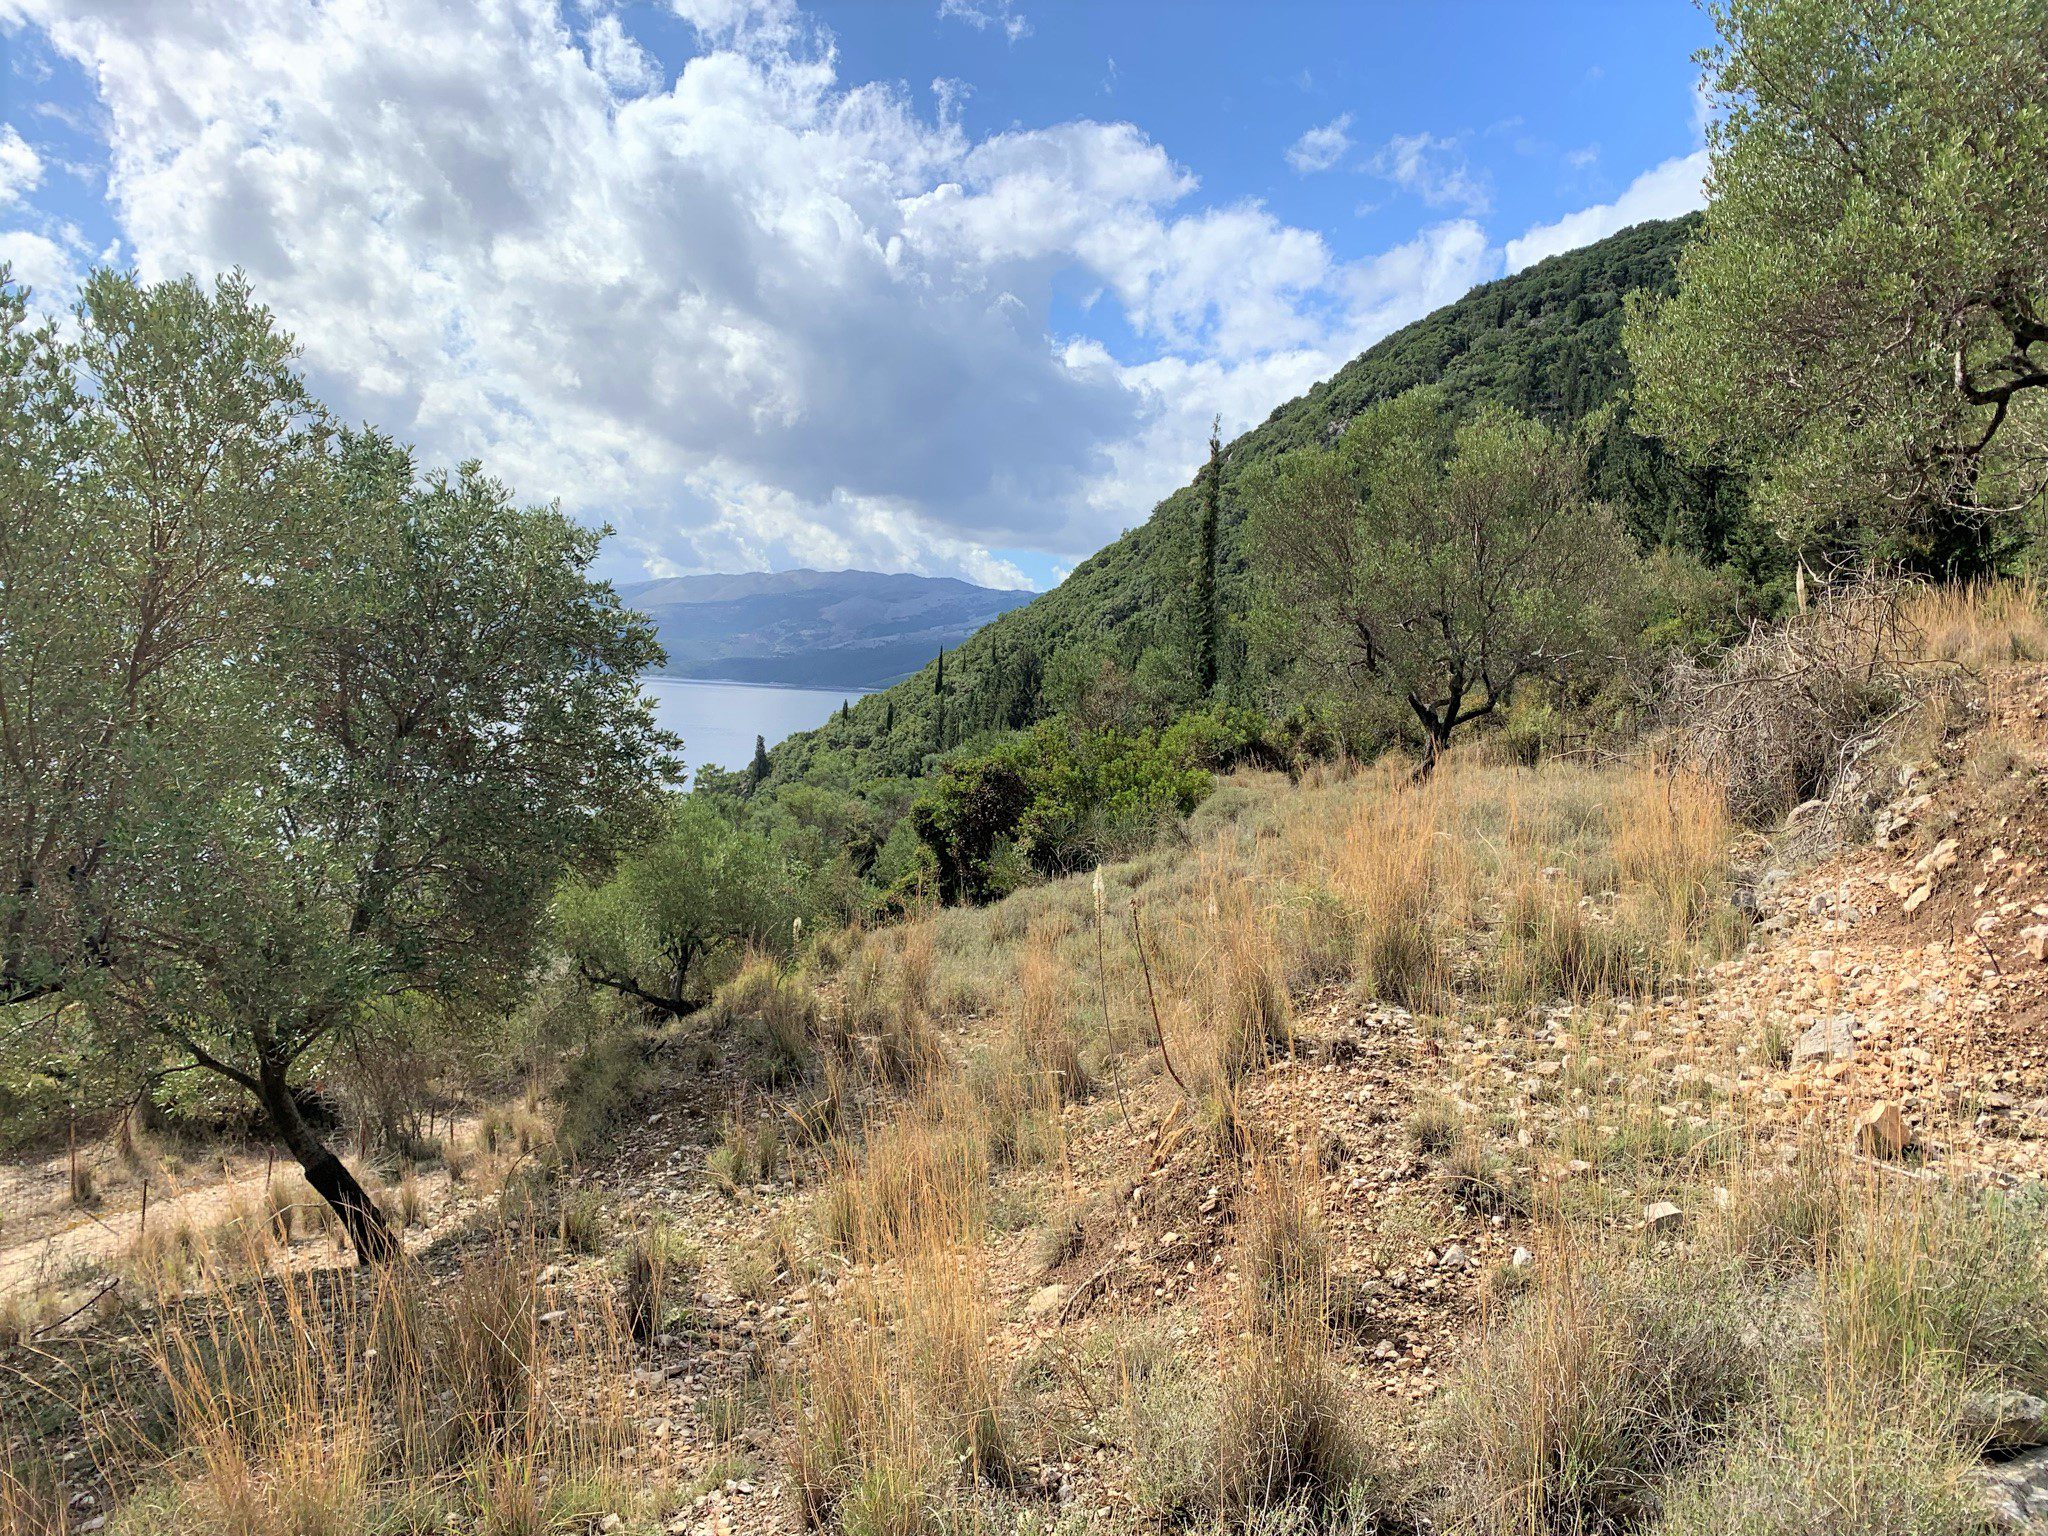 Terrain of land for sale Ithaca Greece, Stavros